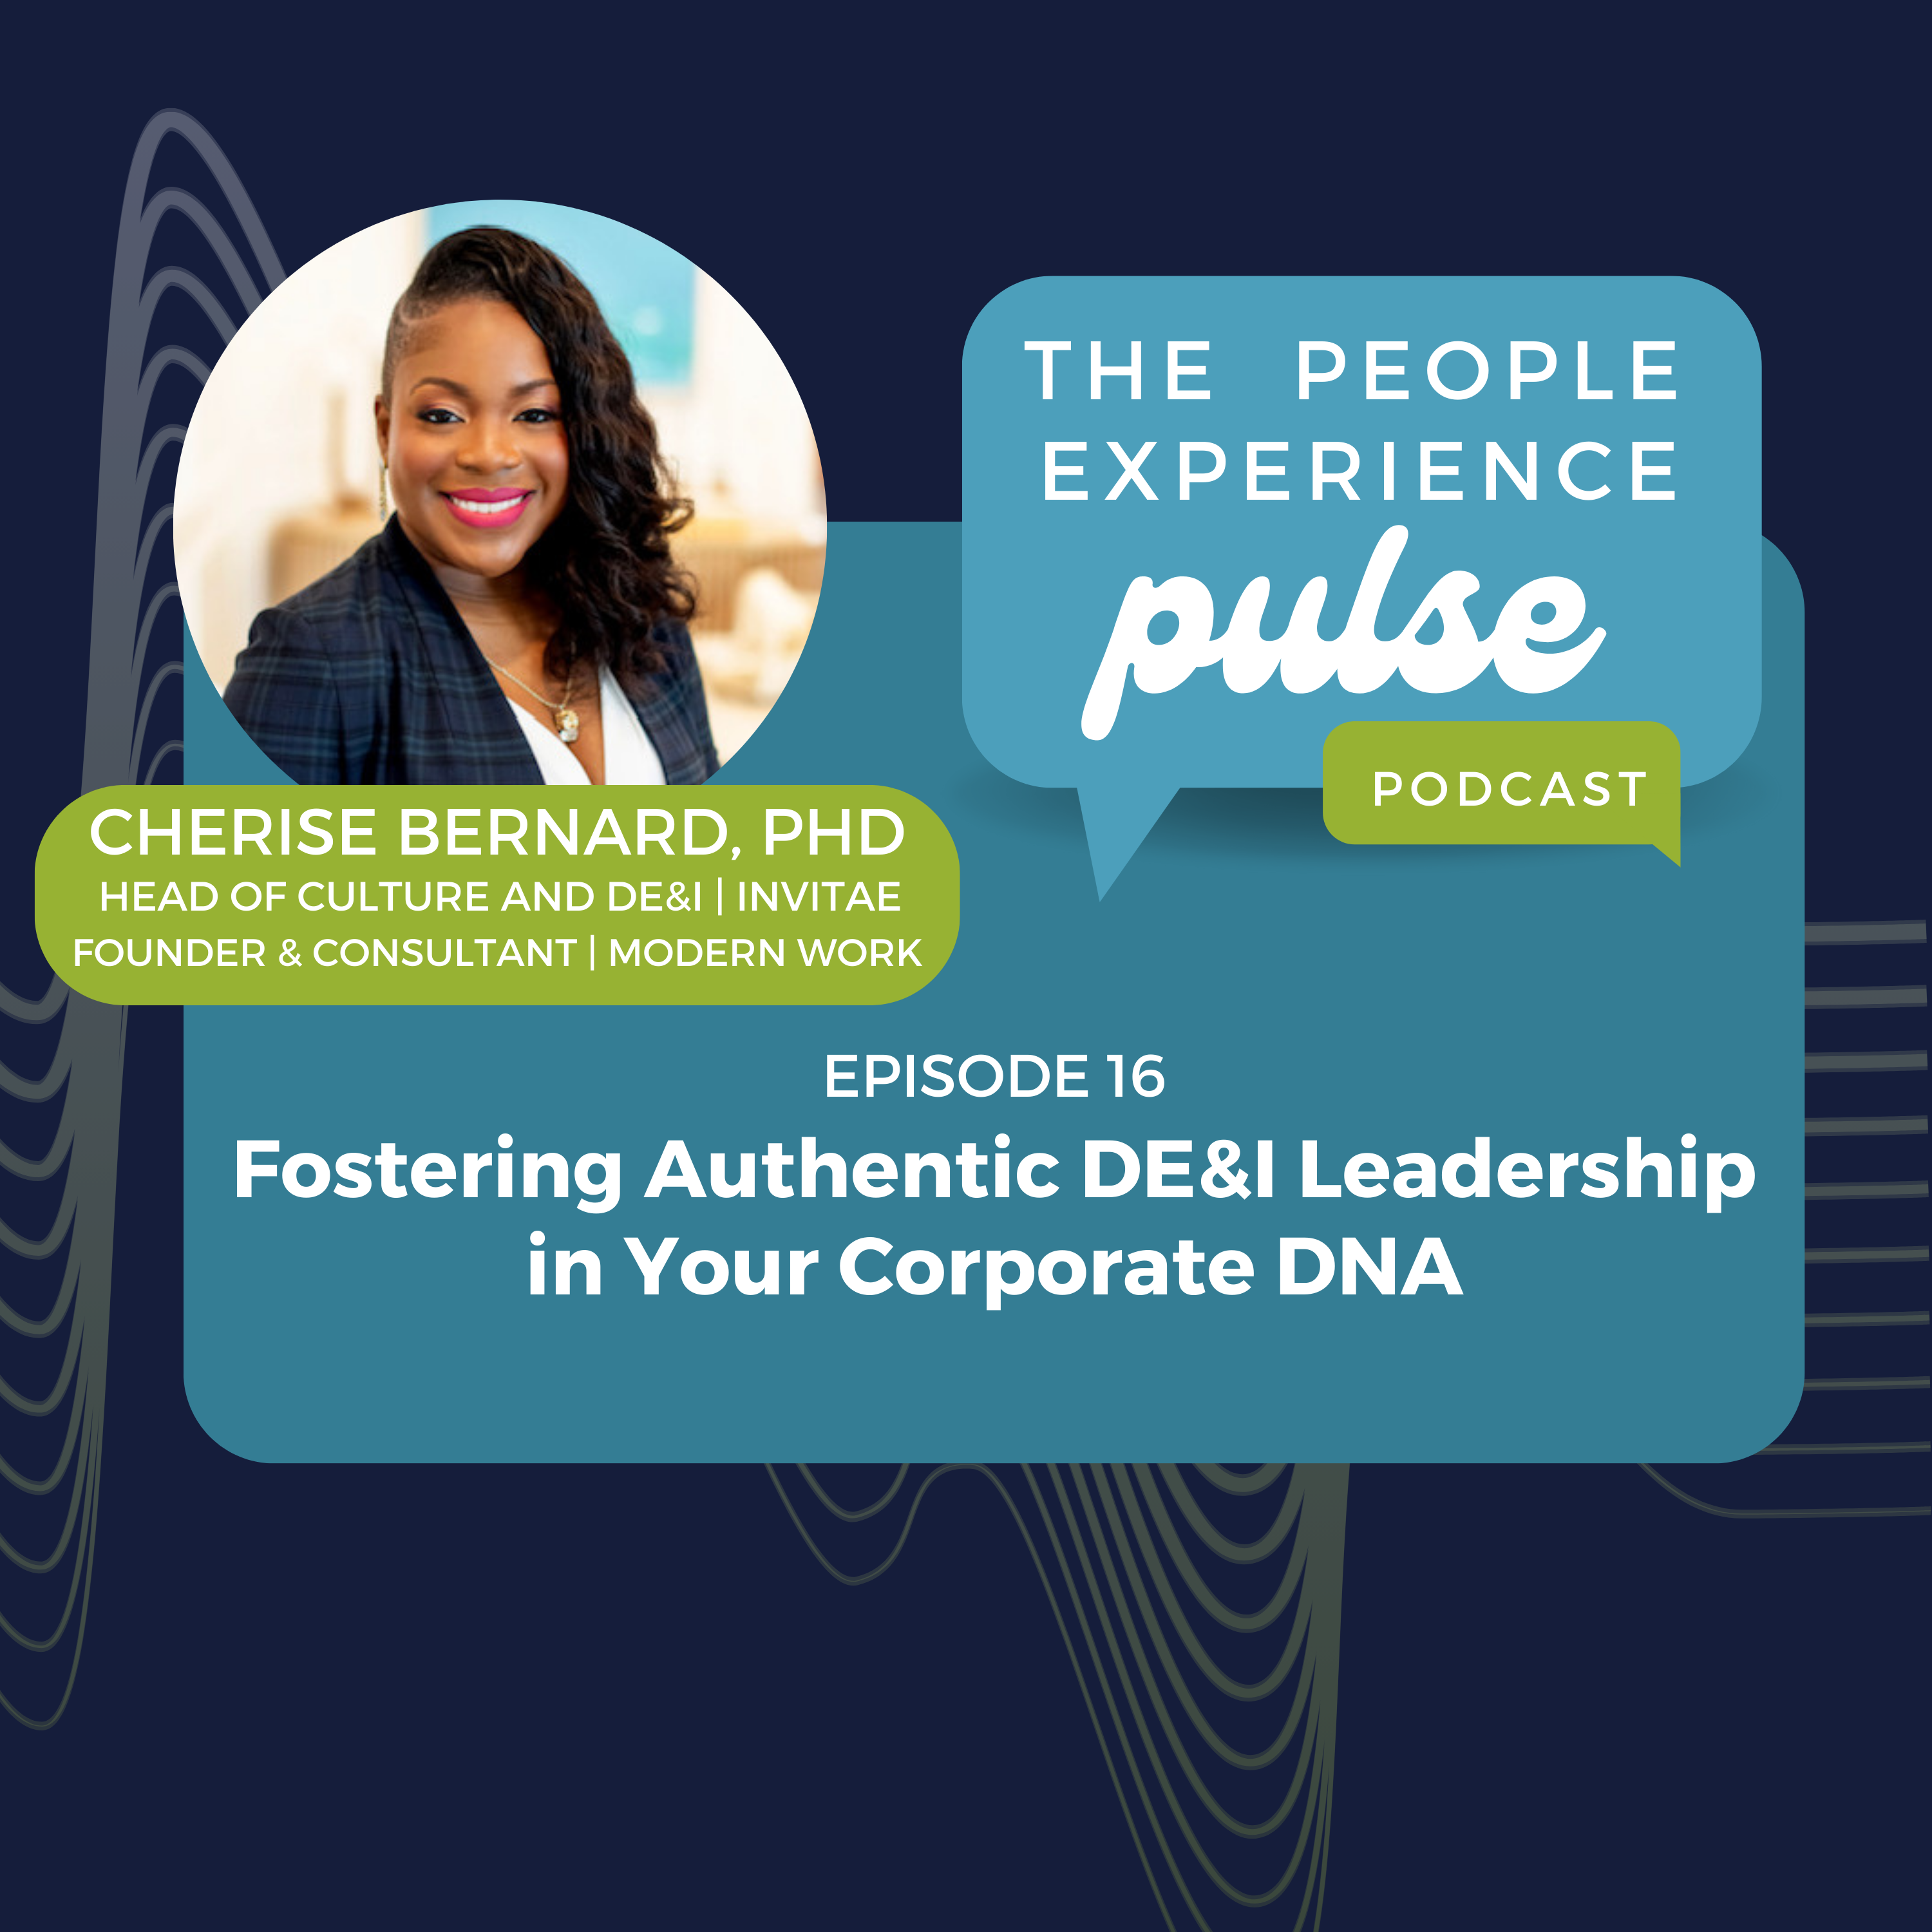 Fostering Authentic DE&I Leadership in Your Corporate DNA